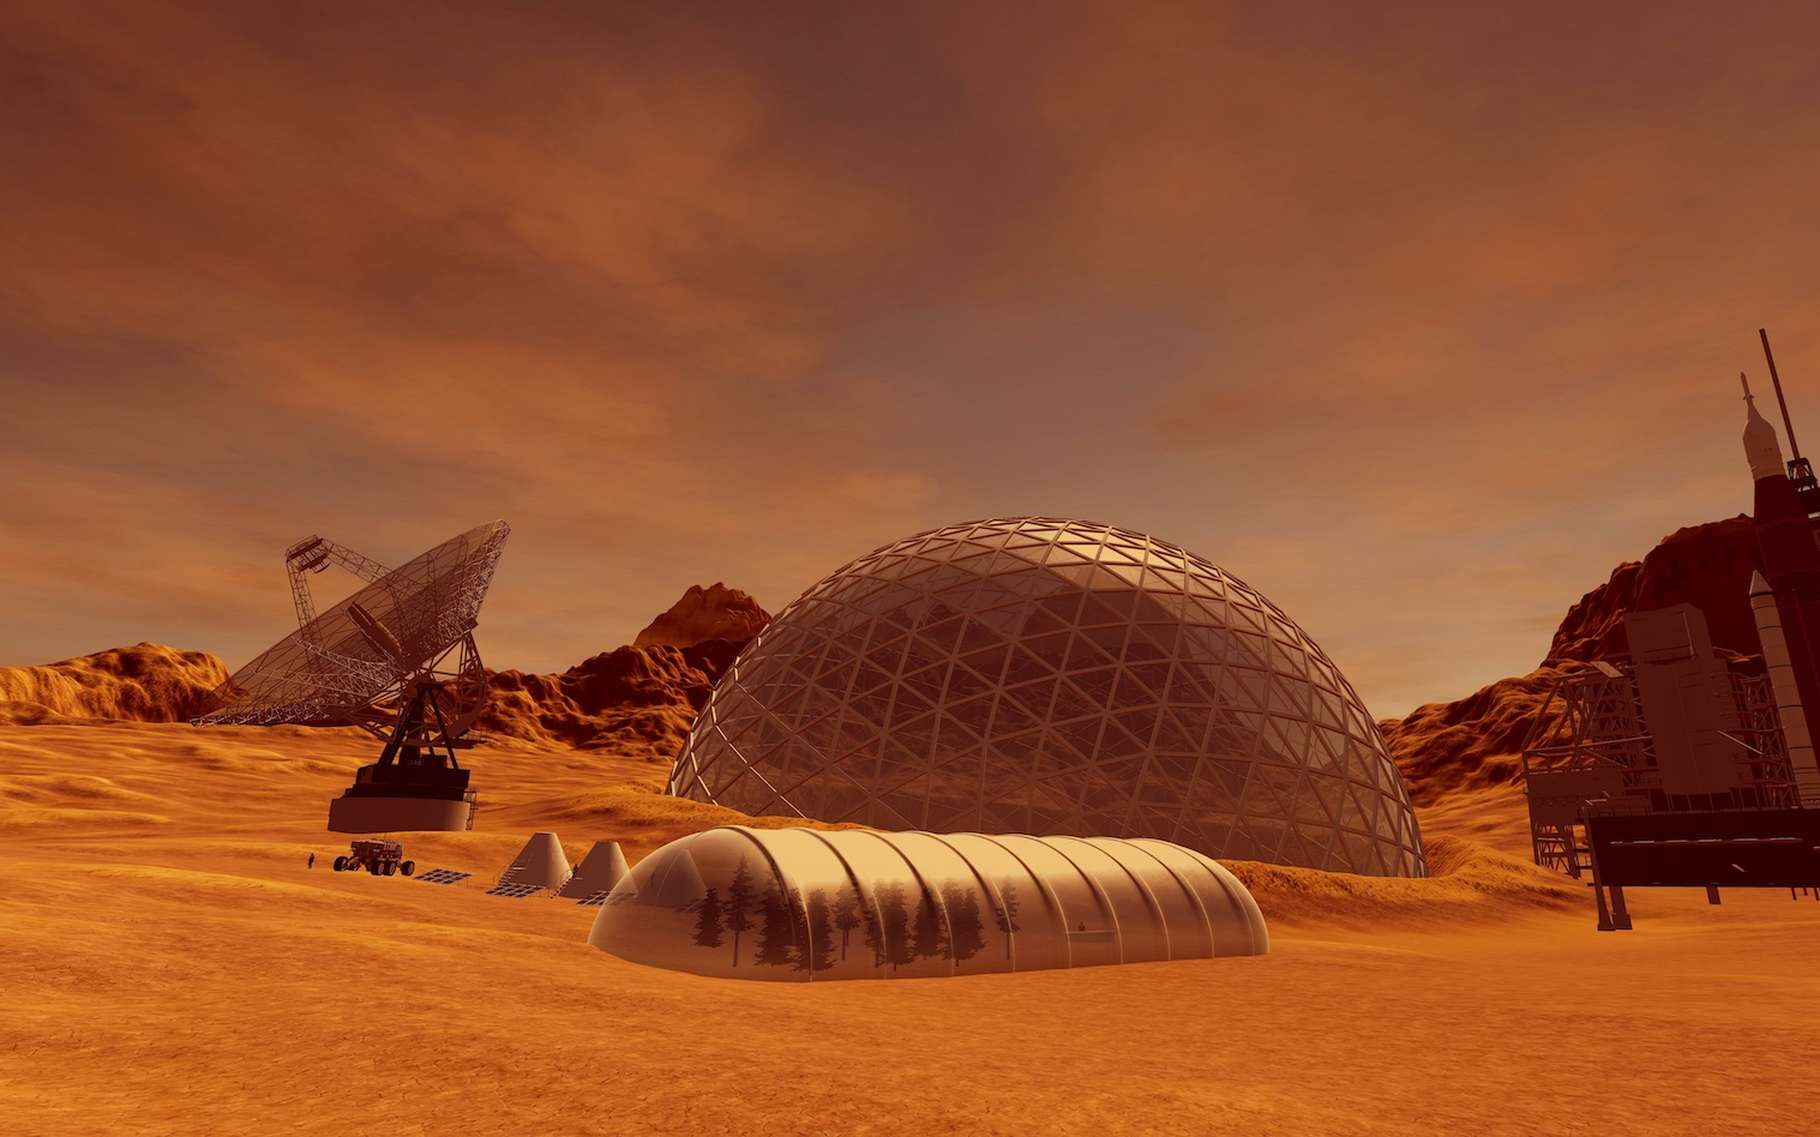 Finally, nuclear power is not the best solution for colonies on Mars